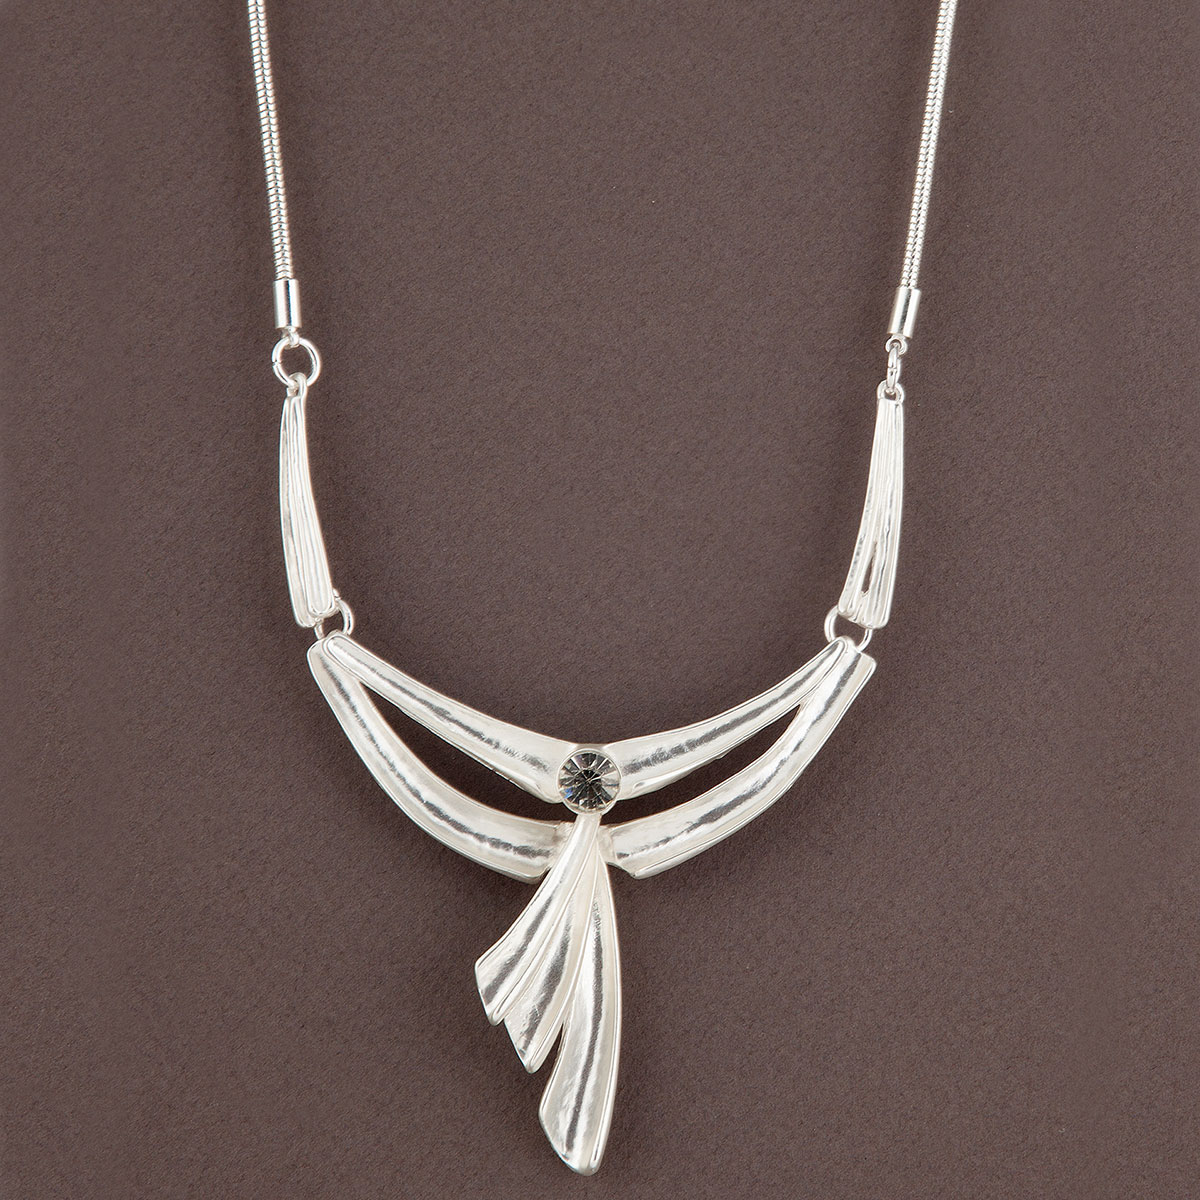 Satin Silver Drop Art Deco with Stone on Chain Necklace